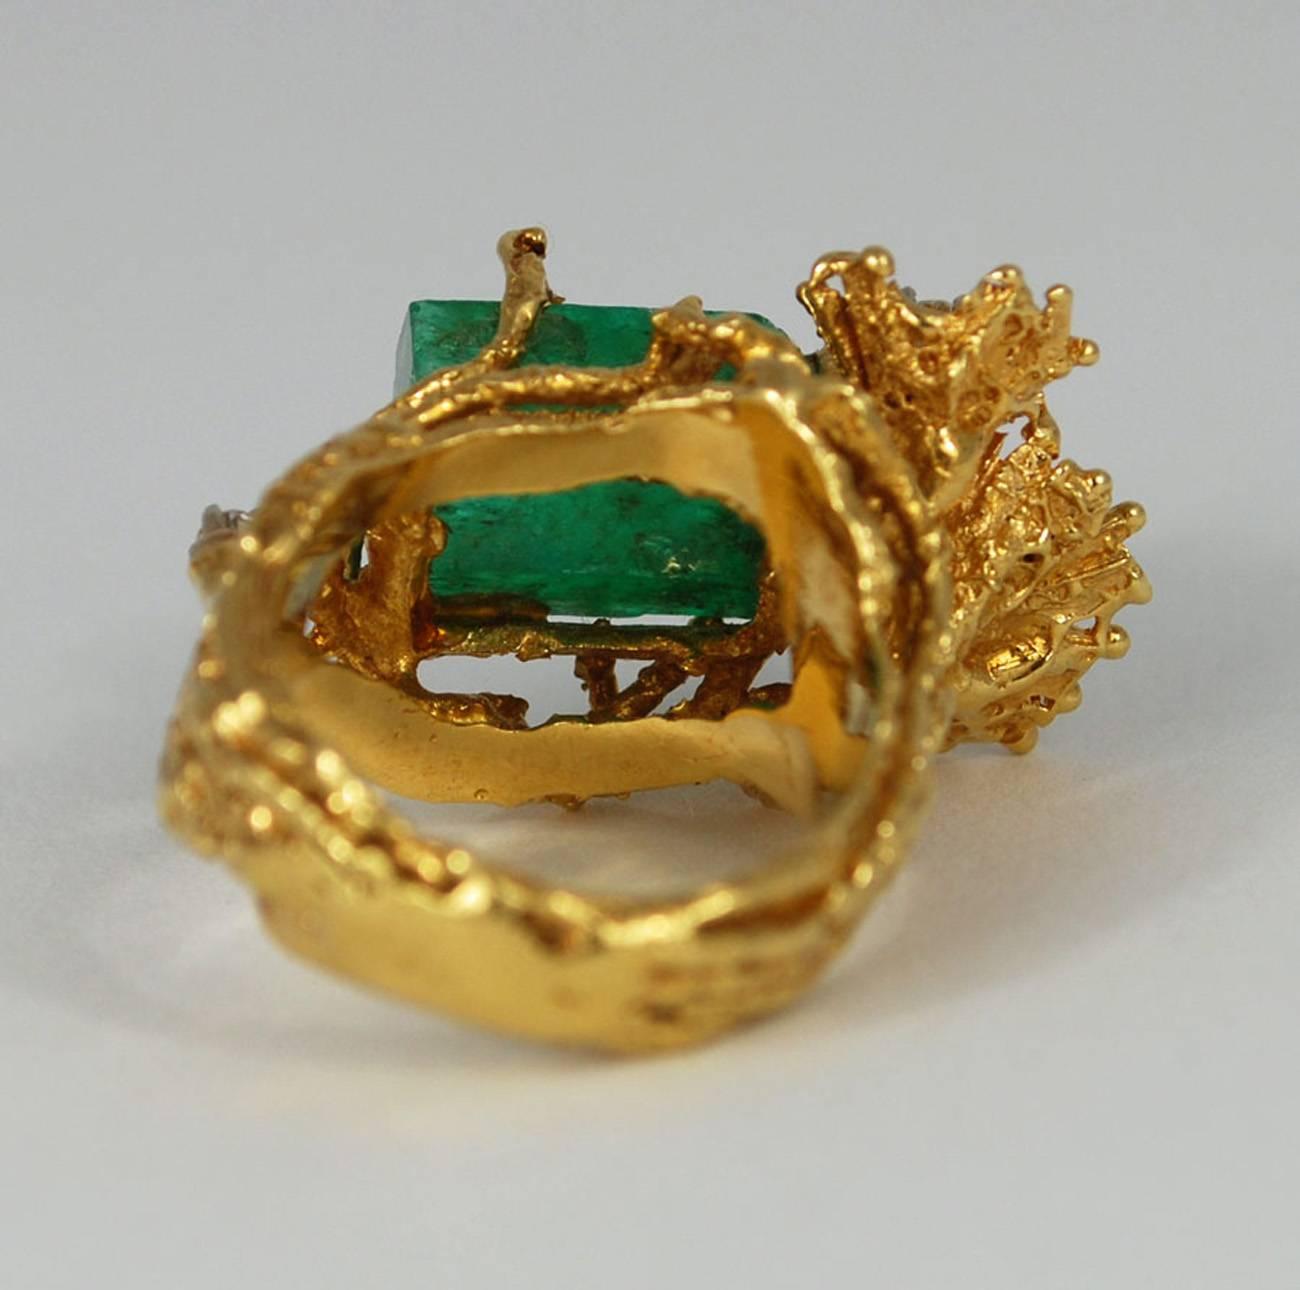 A thick, naturalistic 18K gold band splits into branches wrap around to hold in a large raw emerald stone. At its side, two round cut diamonds are set into gold abstract flowers. A third diamond adds sparkle to the other side of the emerald. Marked